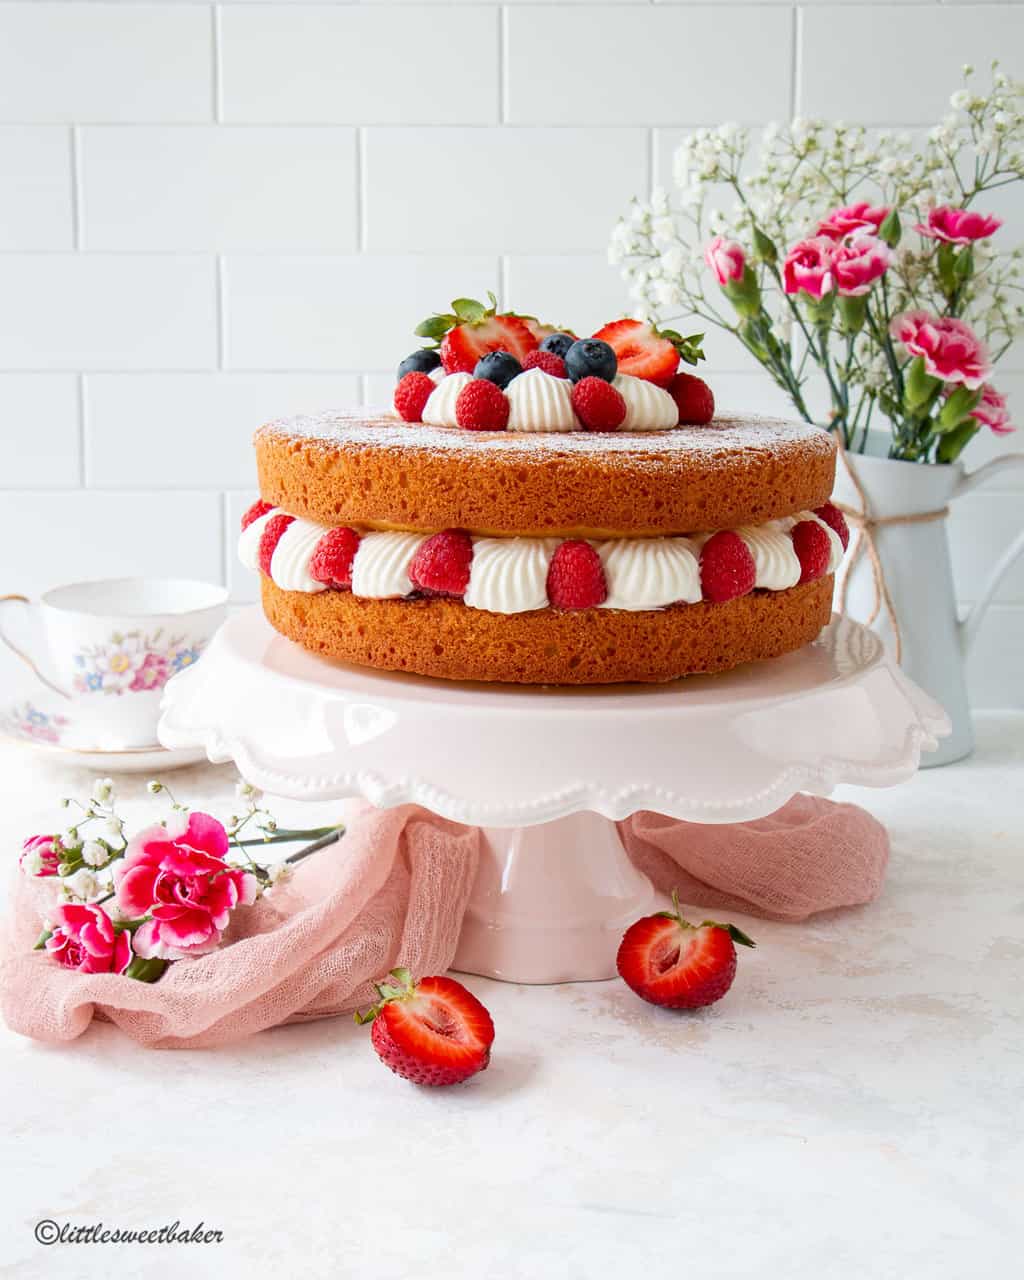 Victoria sponge cake topped with berries and cream on a pink cake stand.